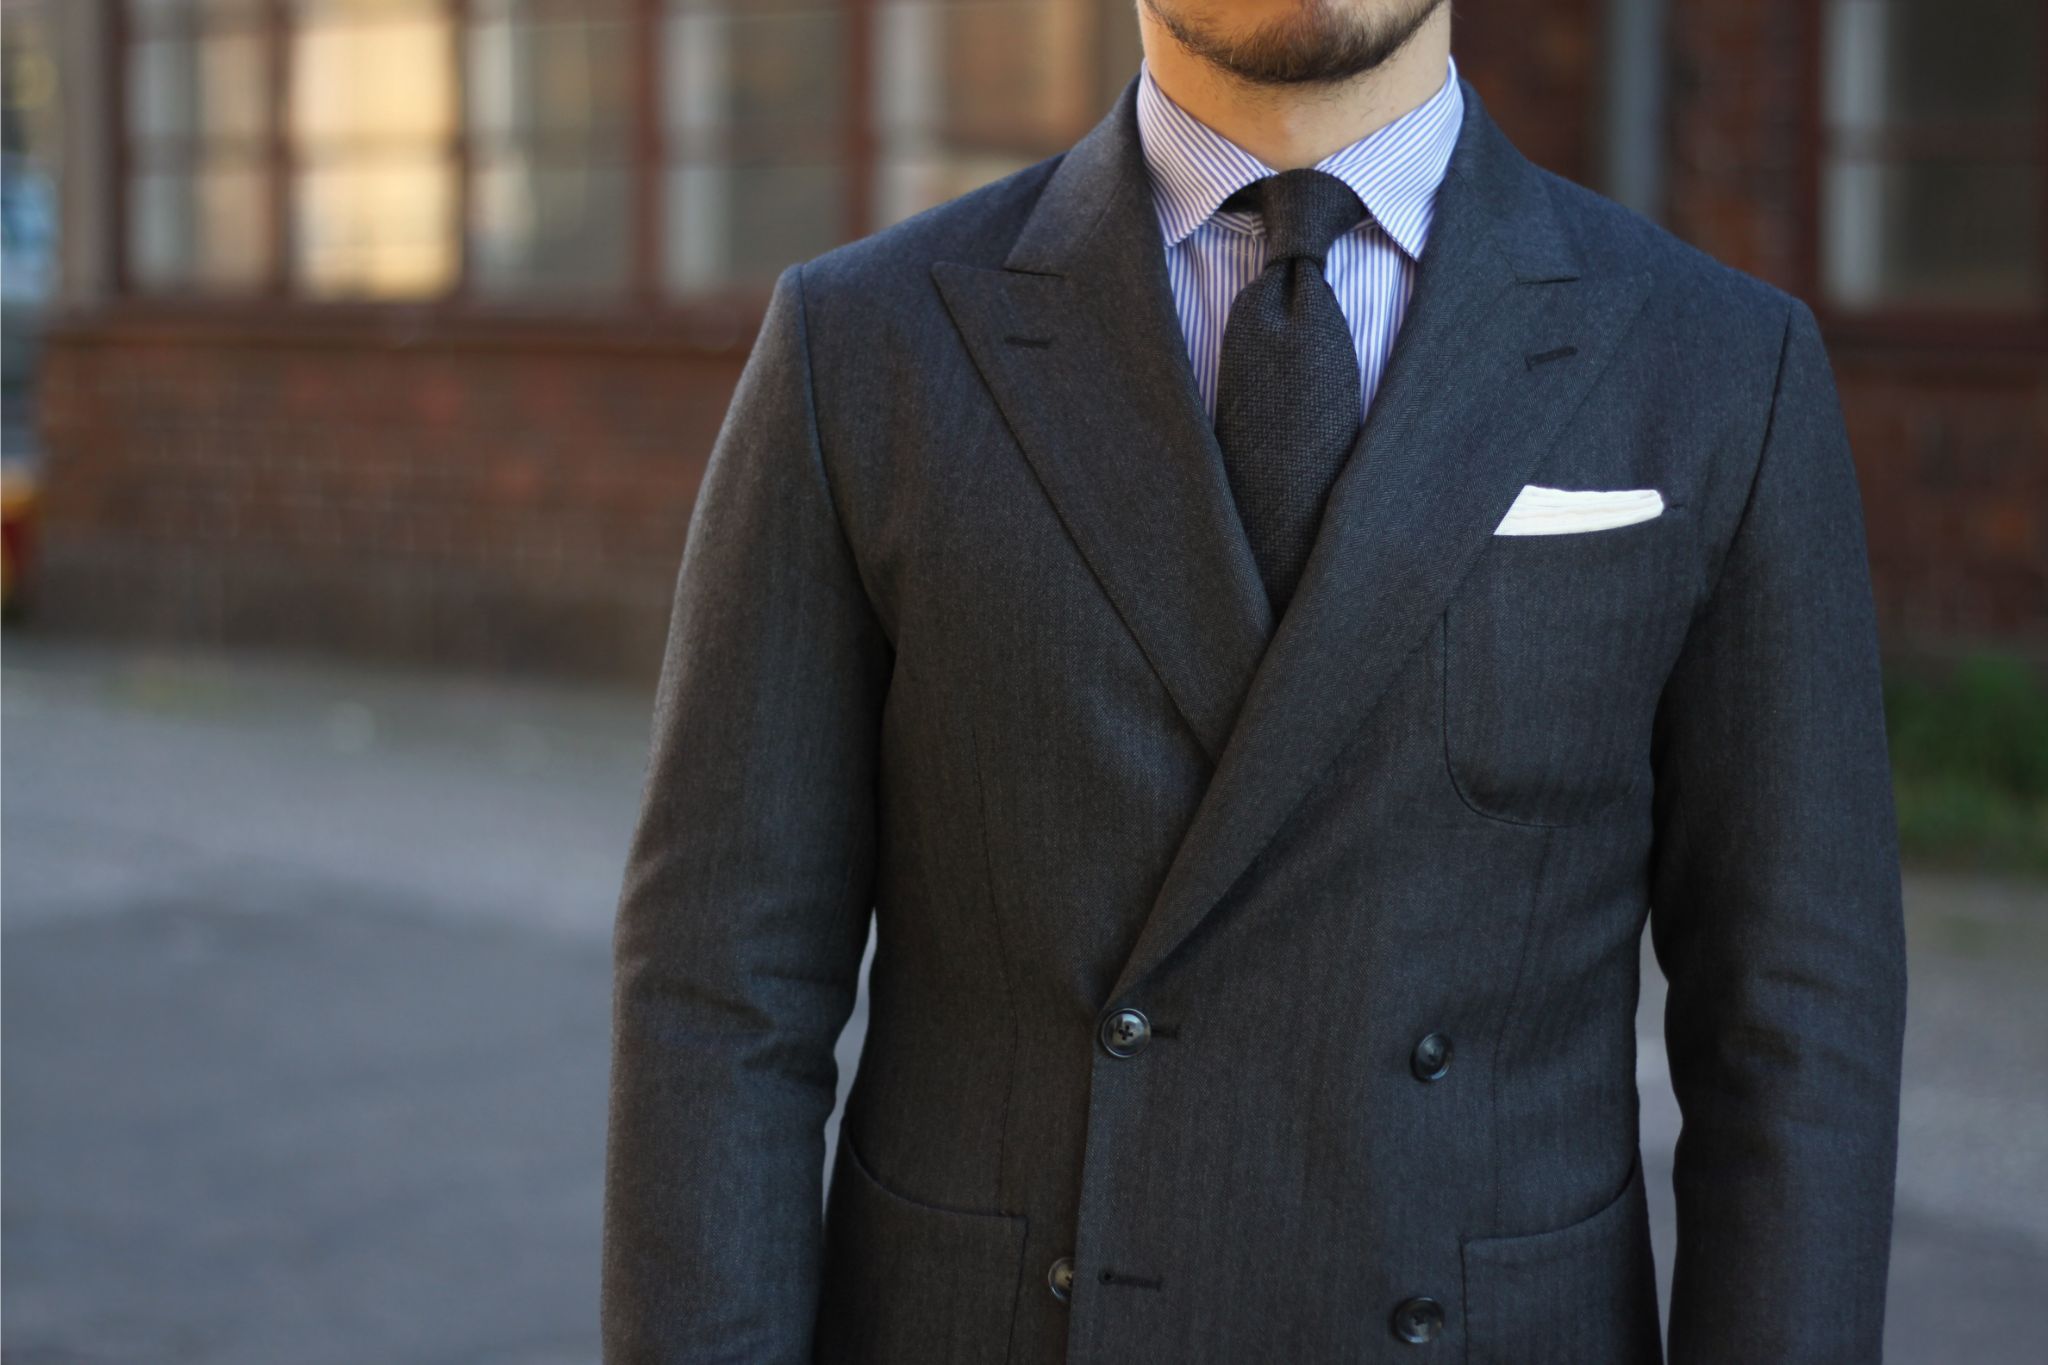 Gray double-breasted suit with a gray tie